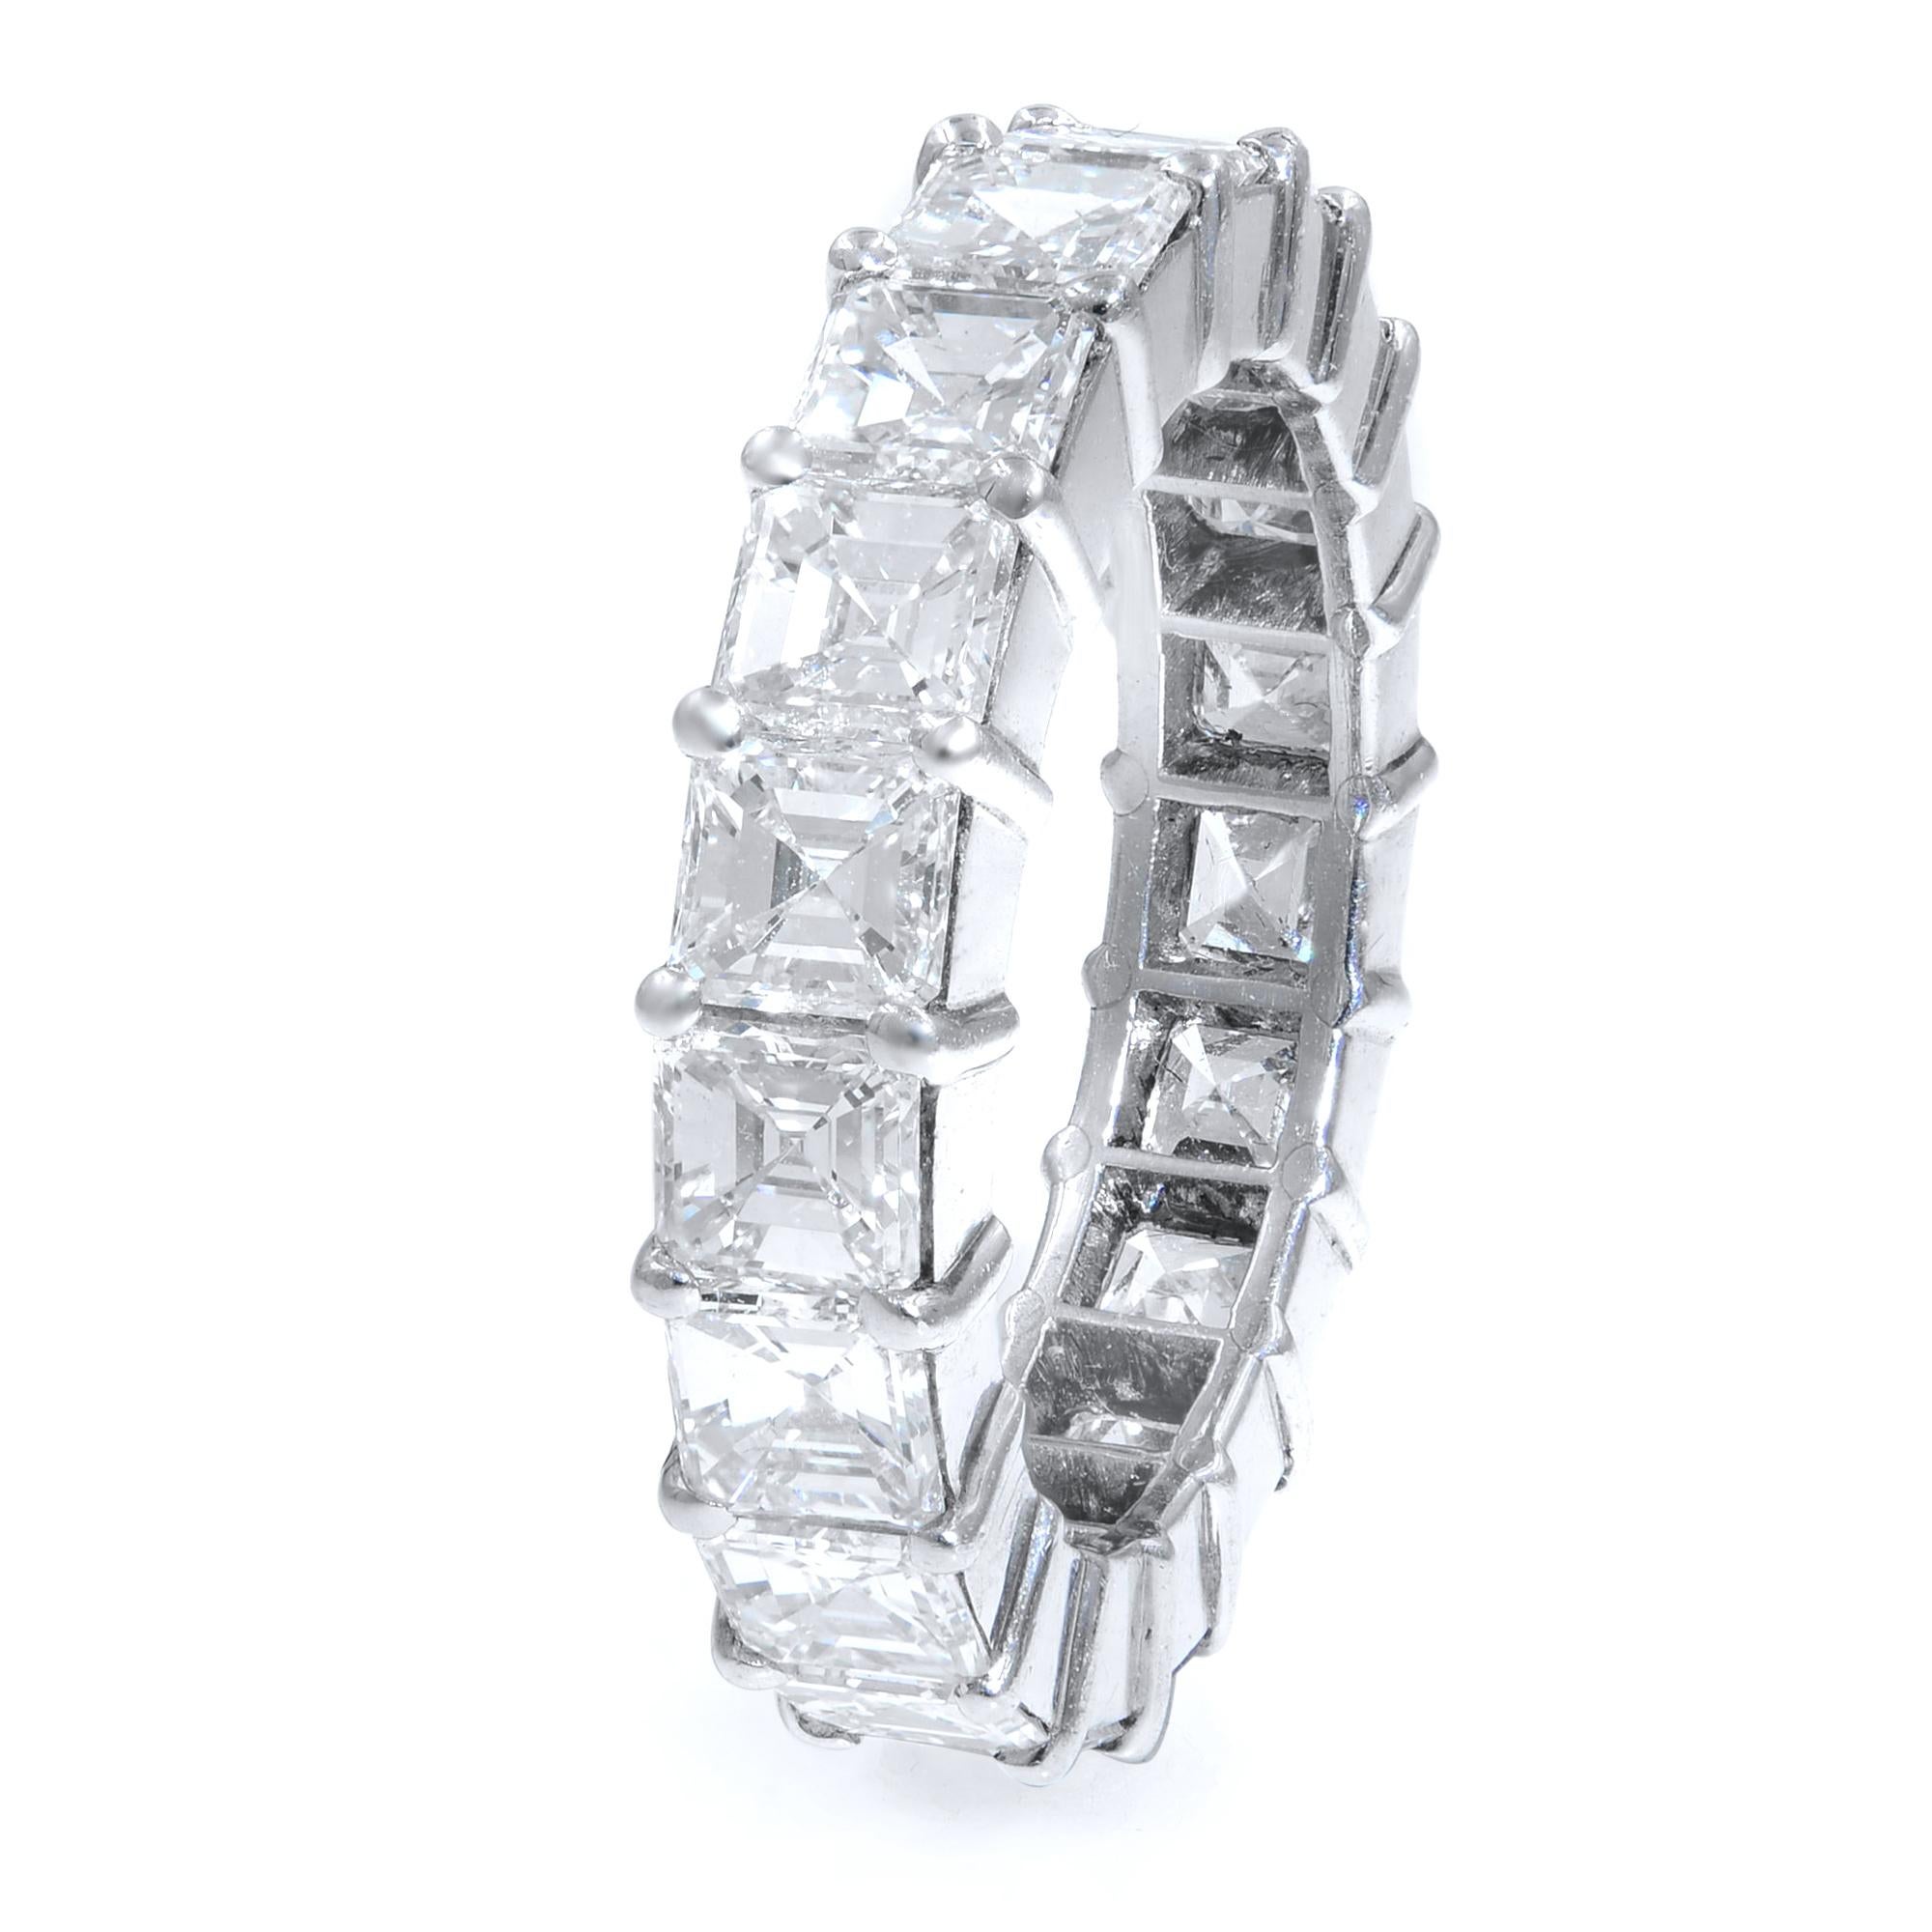 A stunning celebration of your commitment, this fancy-shape diamond eternity band is a confident choice for your bride or bride-to-be. Desired for their rarity and precision, Asscher-cut diamonds are a stunning look. Their octagonal shape allows a